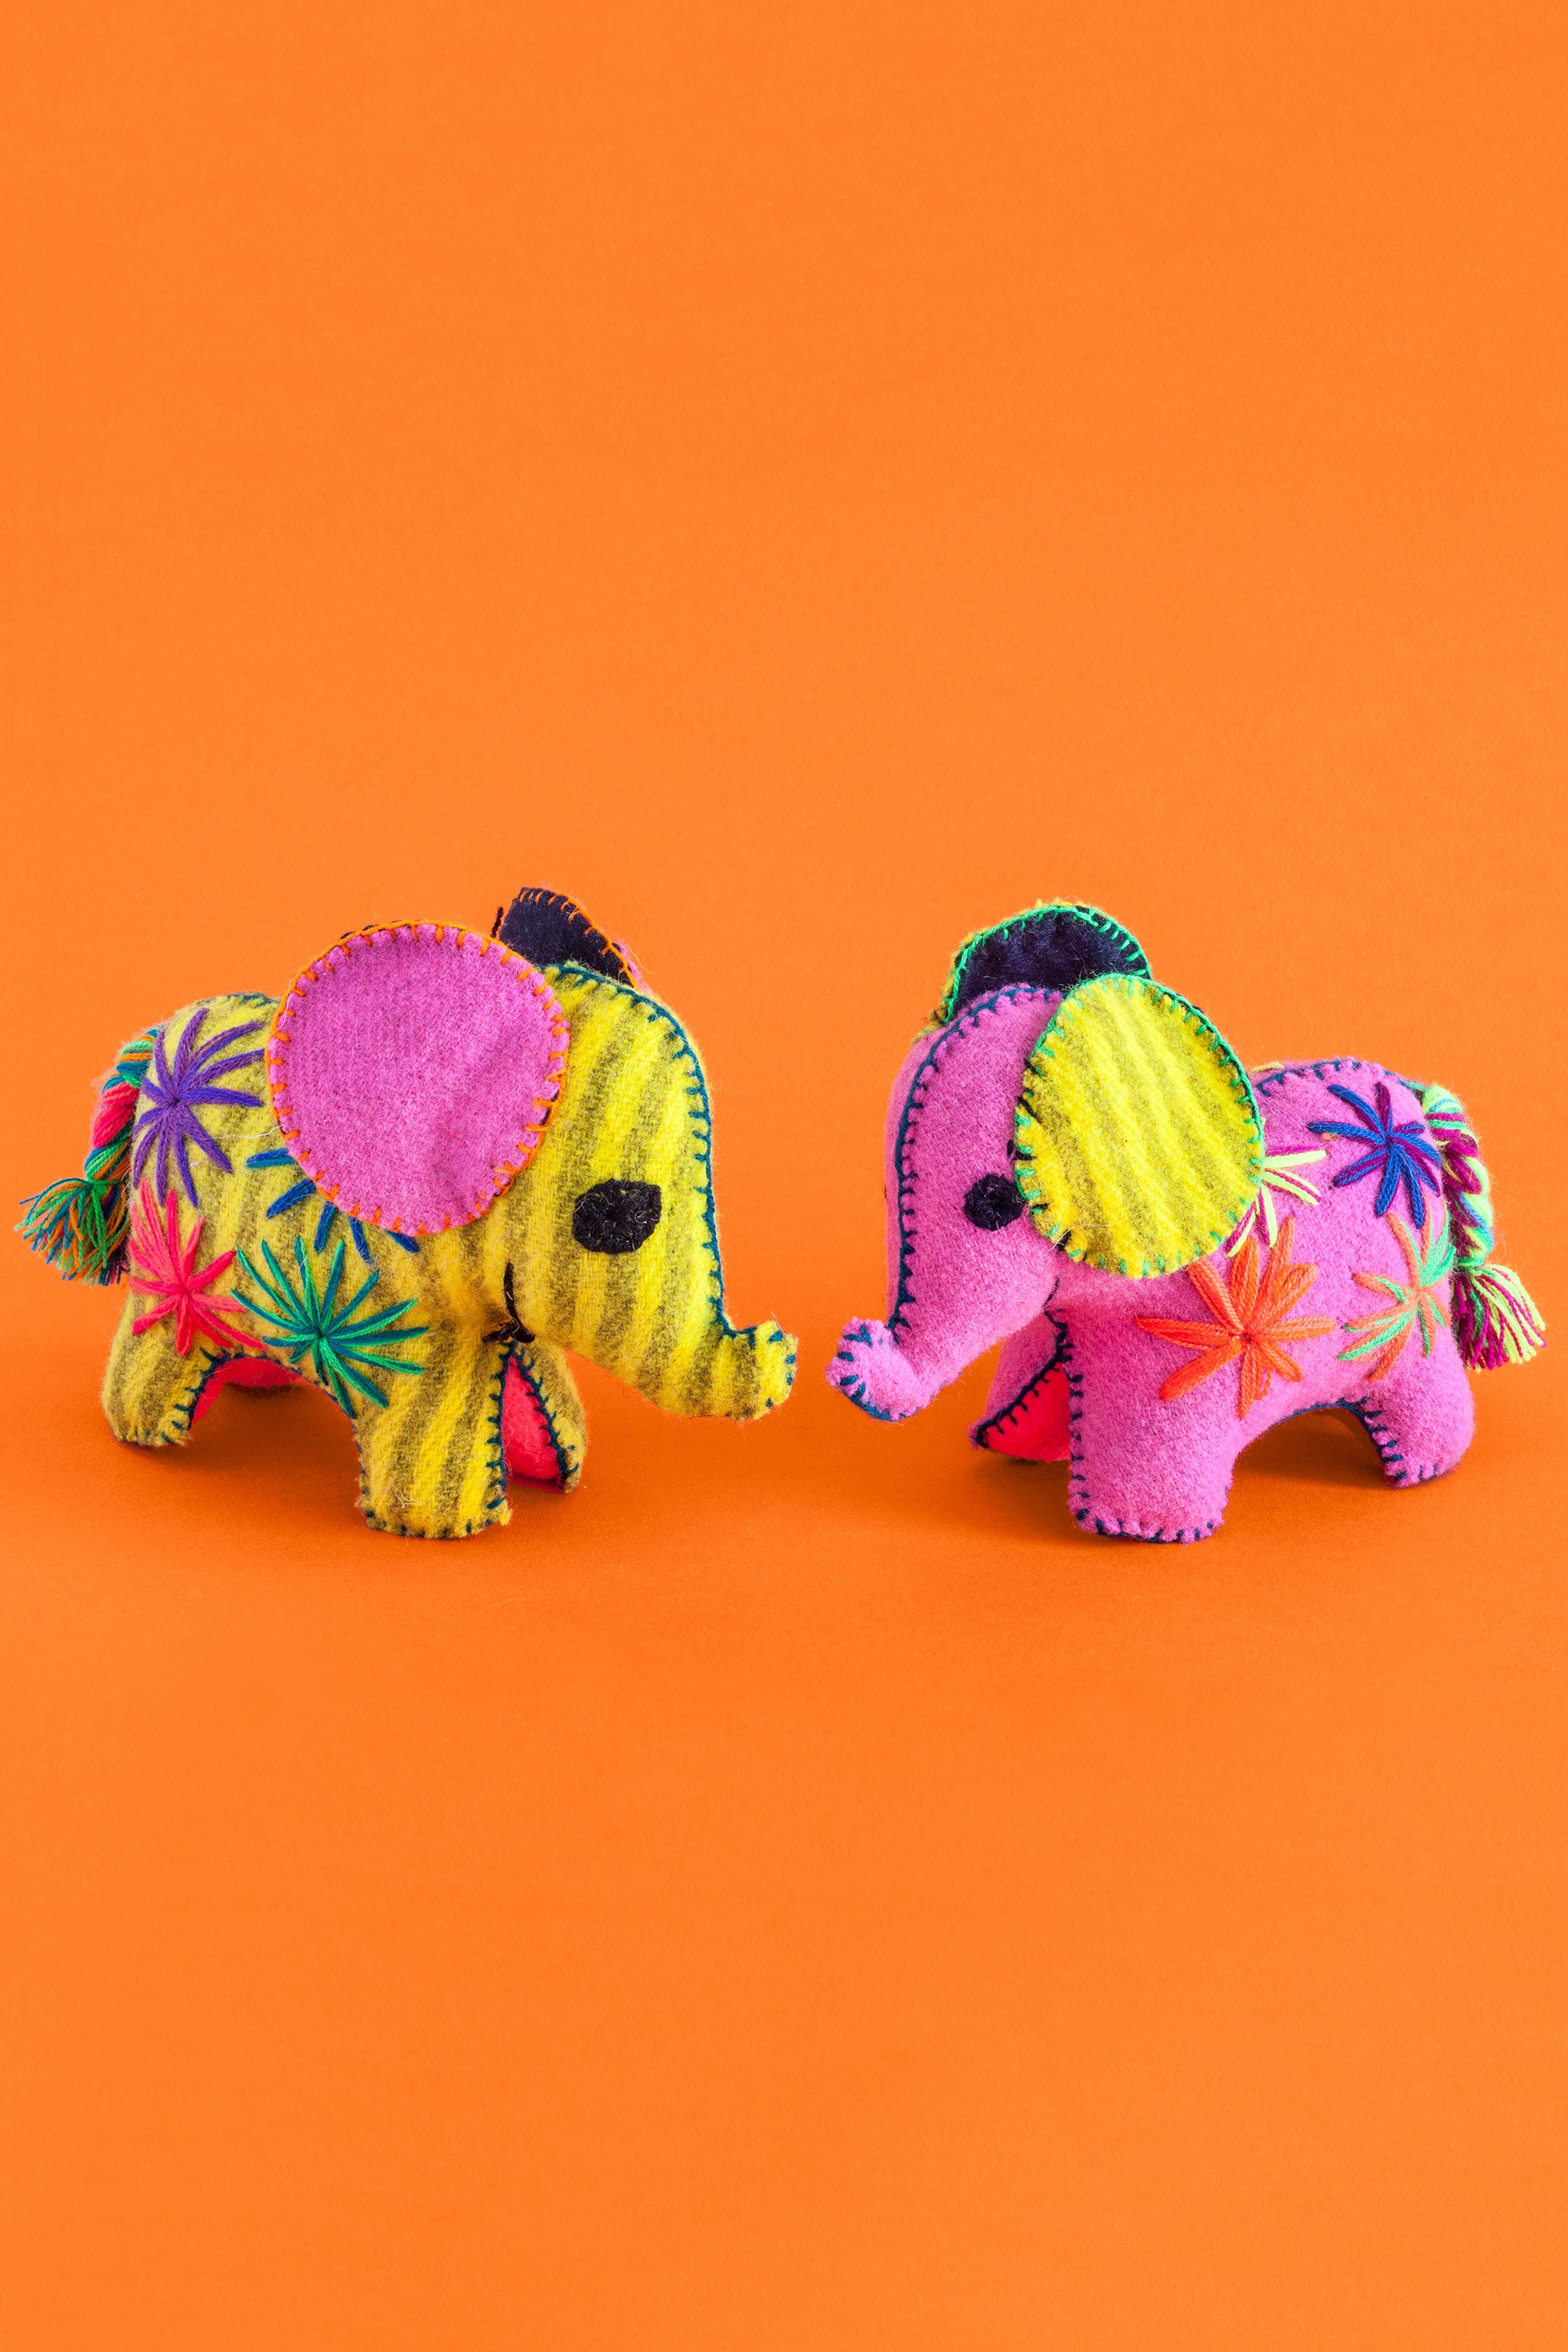 Two colorful felt elephant plush toys with a multicolor braided tails and hand-embroidered features and star designs.